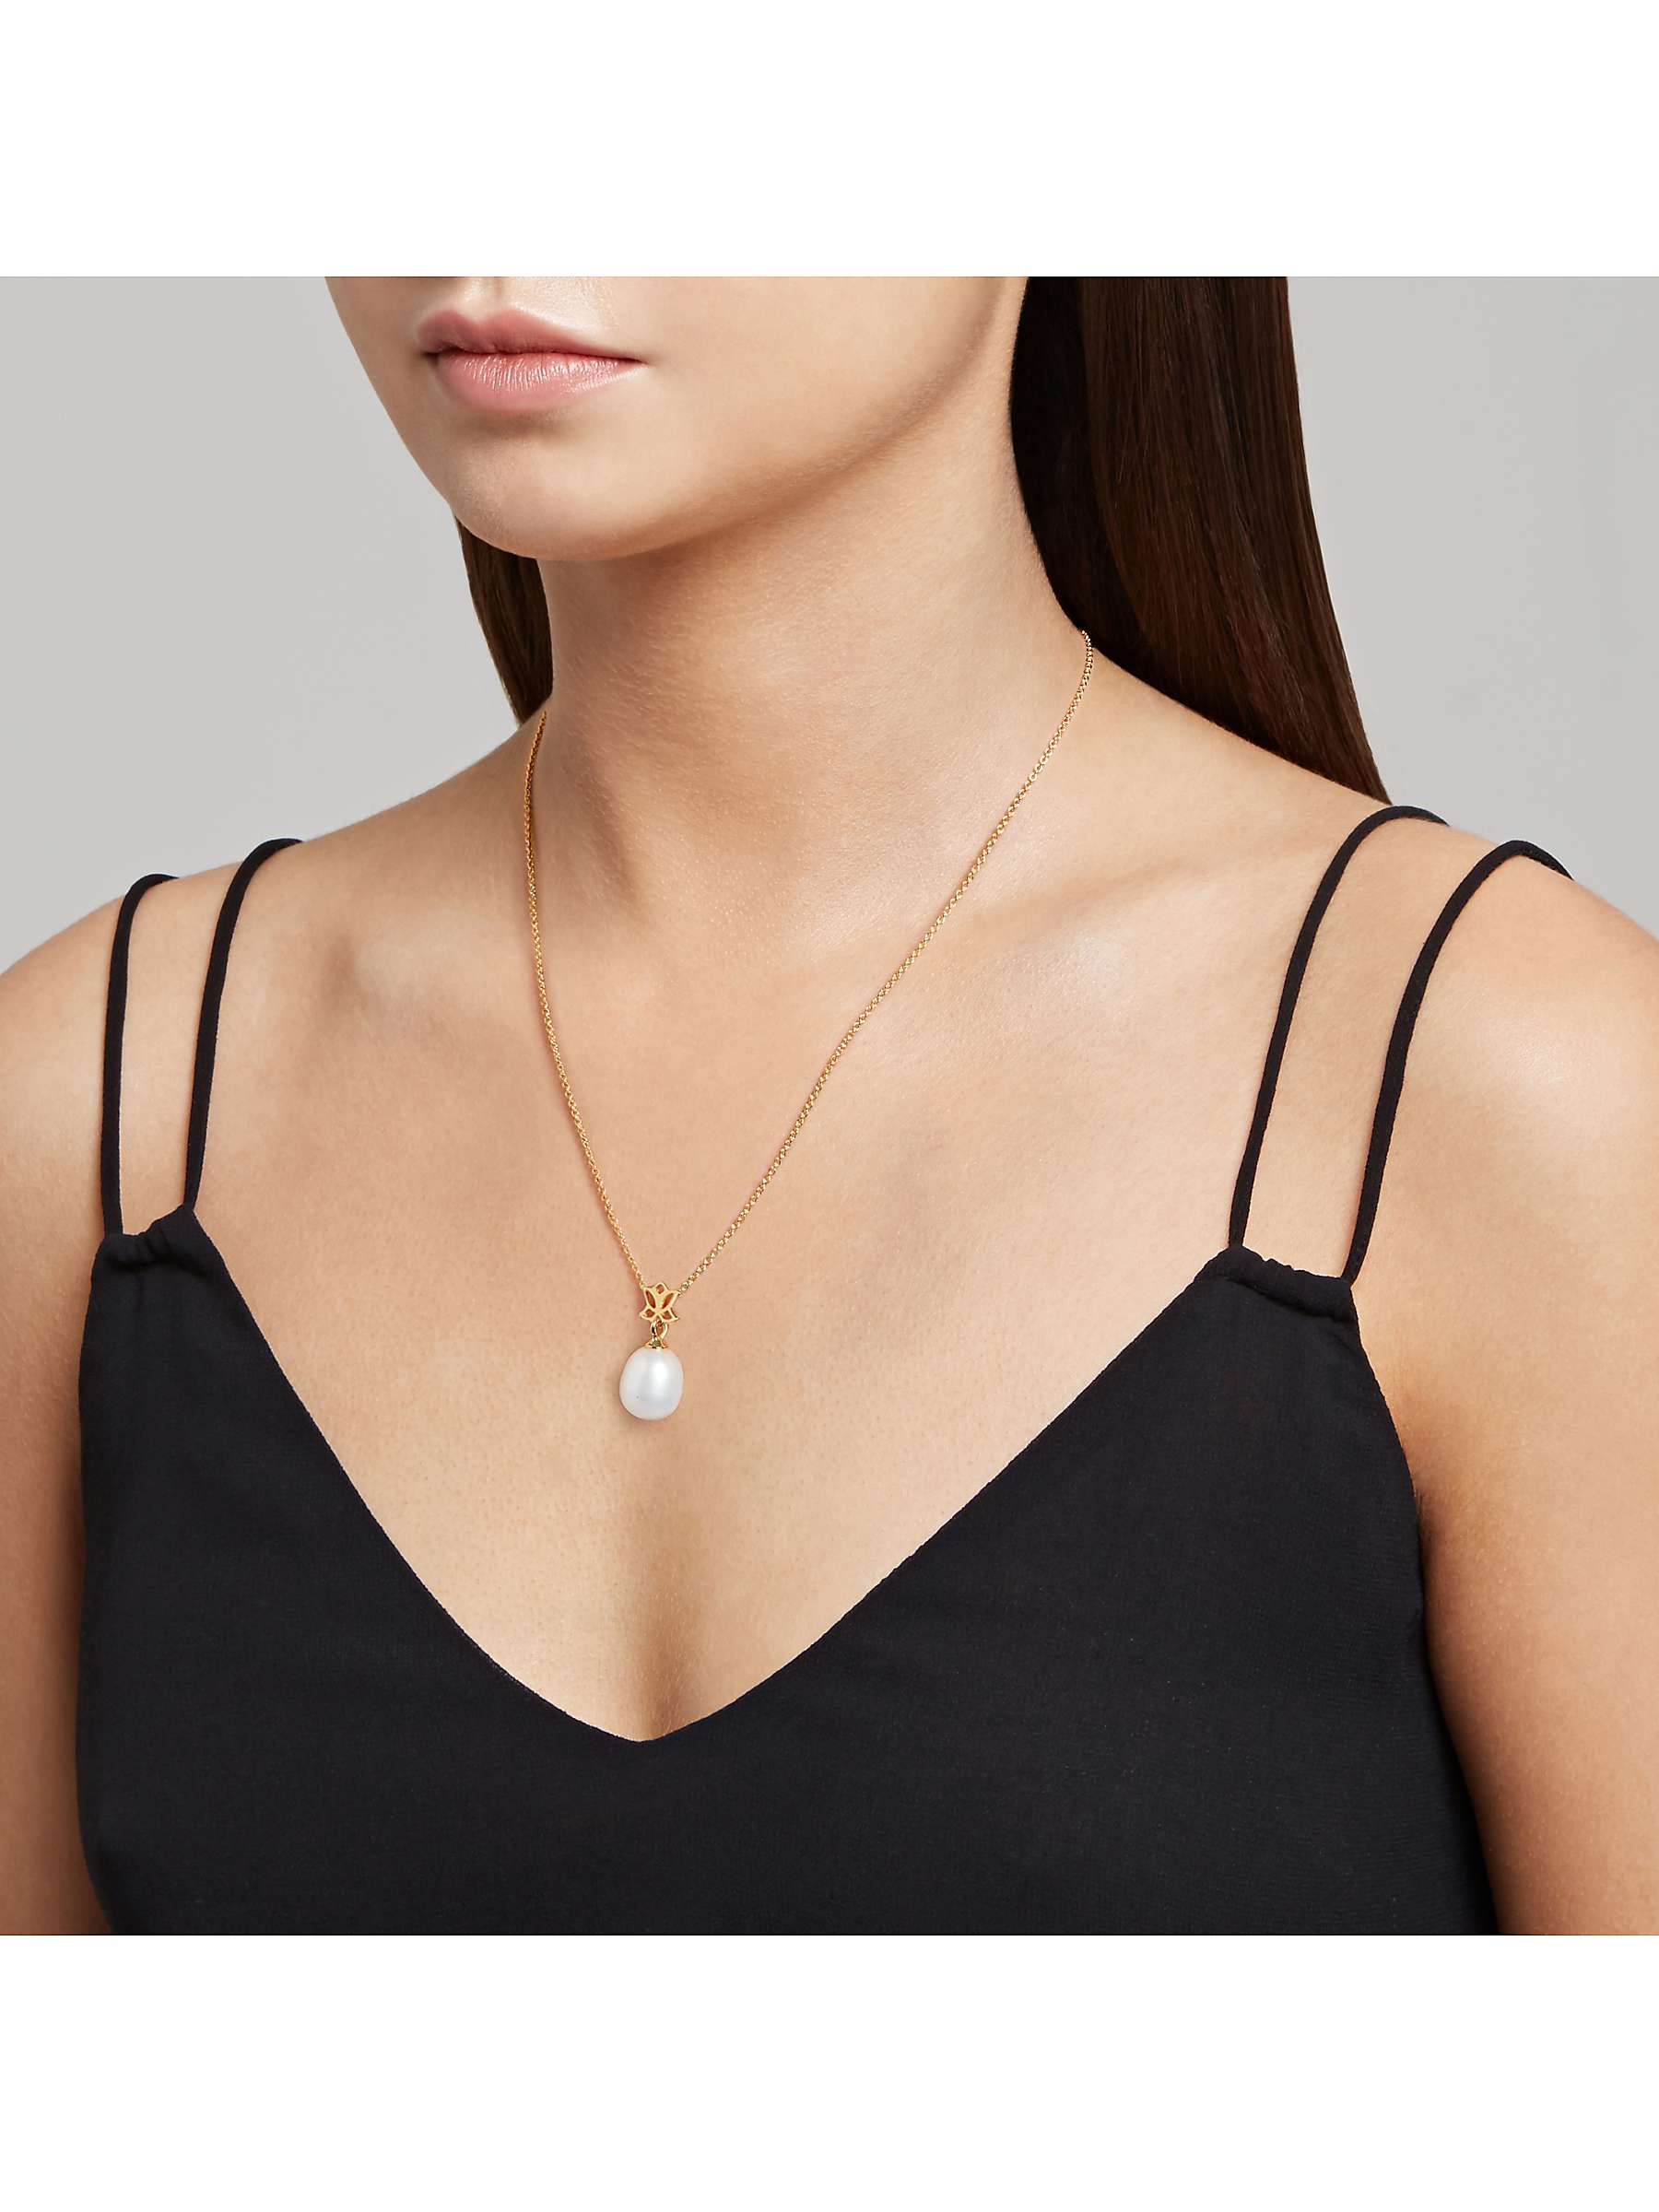 Buy A B Davis 9ct Yellow Gold Freshwater Pearl Pendant Necklace, White Online at johnlewis.com